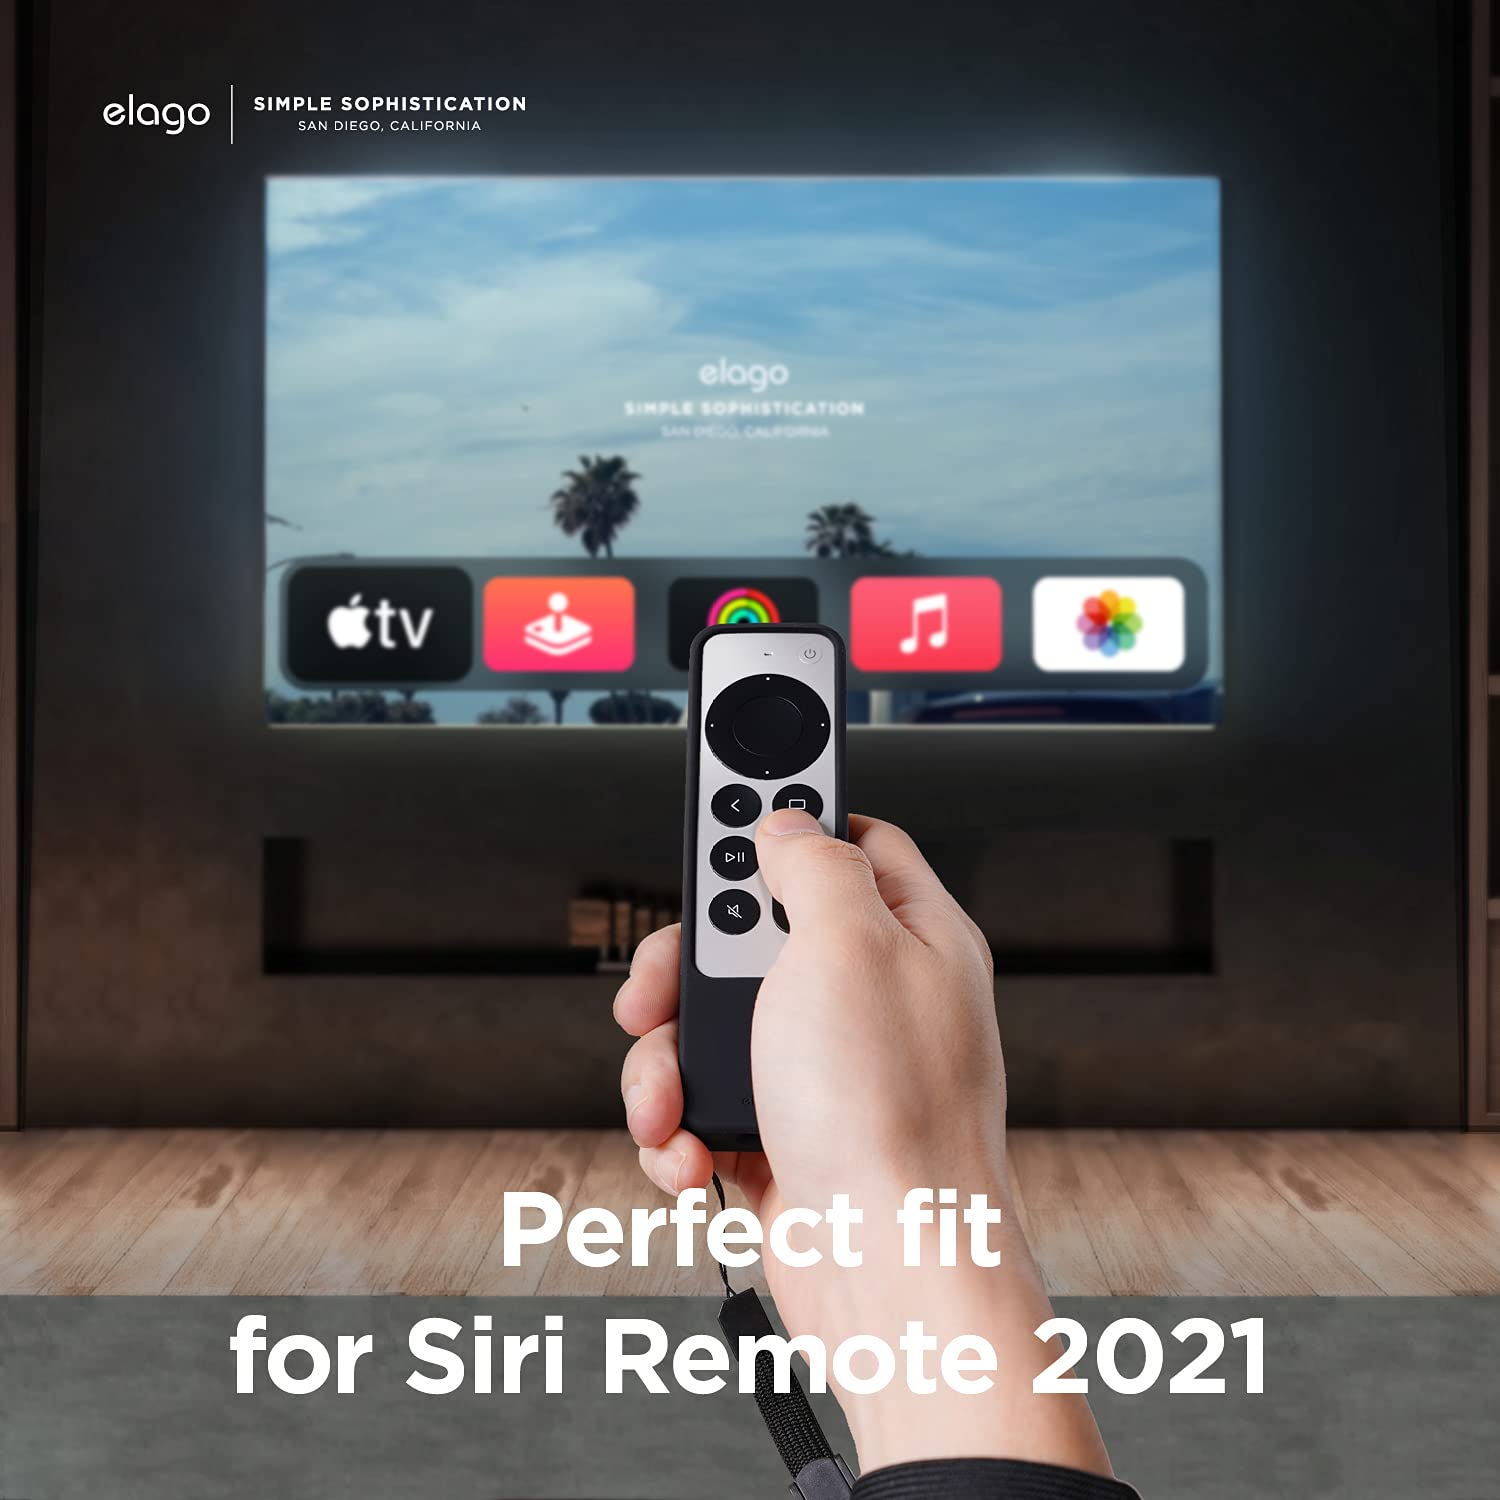 elago R1 Case Compatible with 2022 Apple TV 4K Siri Remote 3rd Gen, Compatible with 2021 Apple TV Siri Remote 2nd Gen- Magnet Technology, Lanyard Included, Full Access to All Functions [Black]